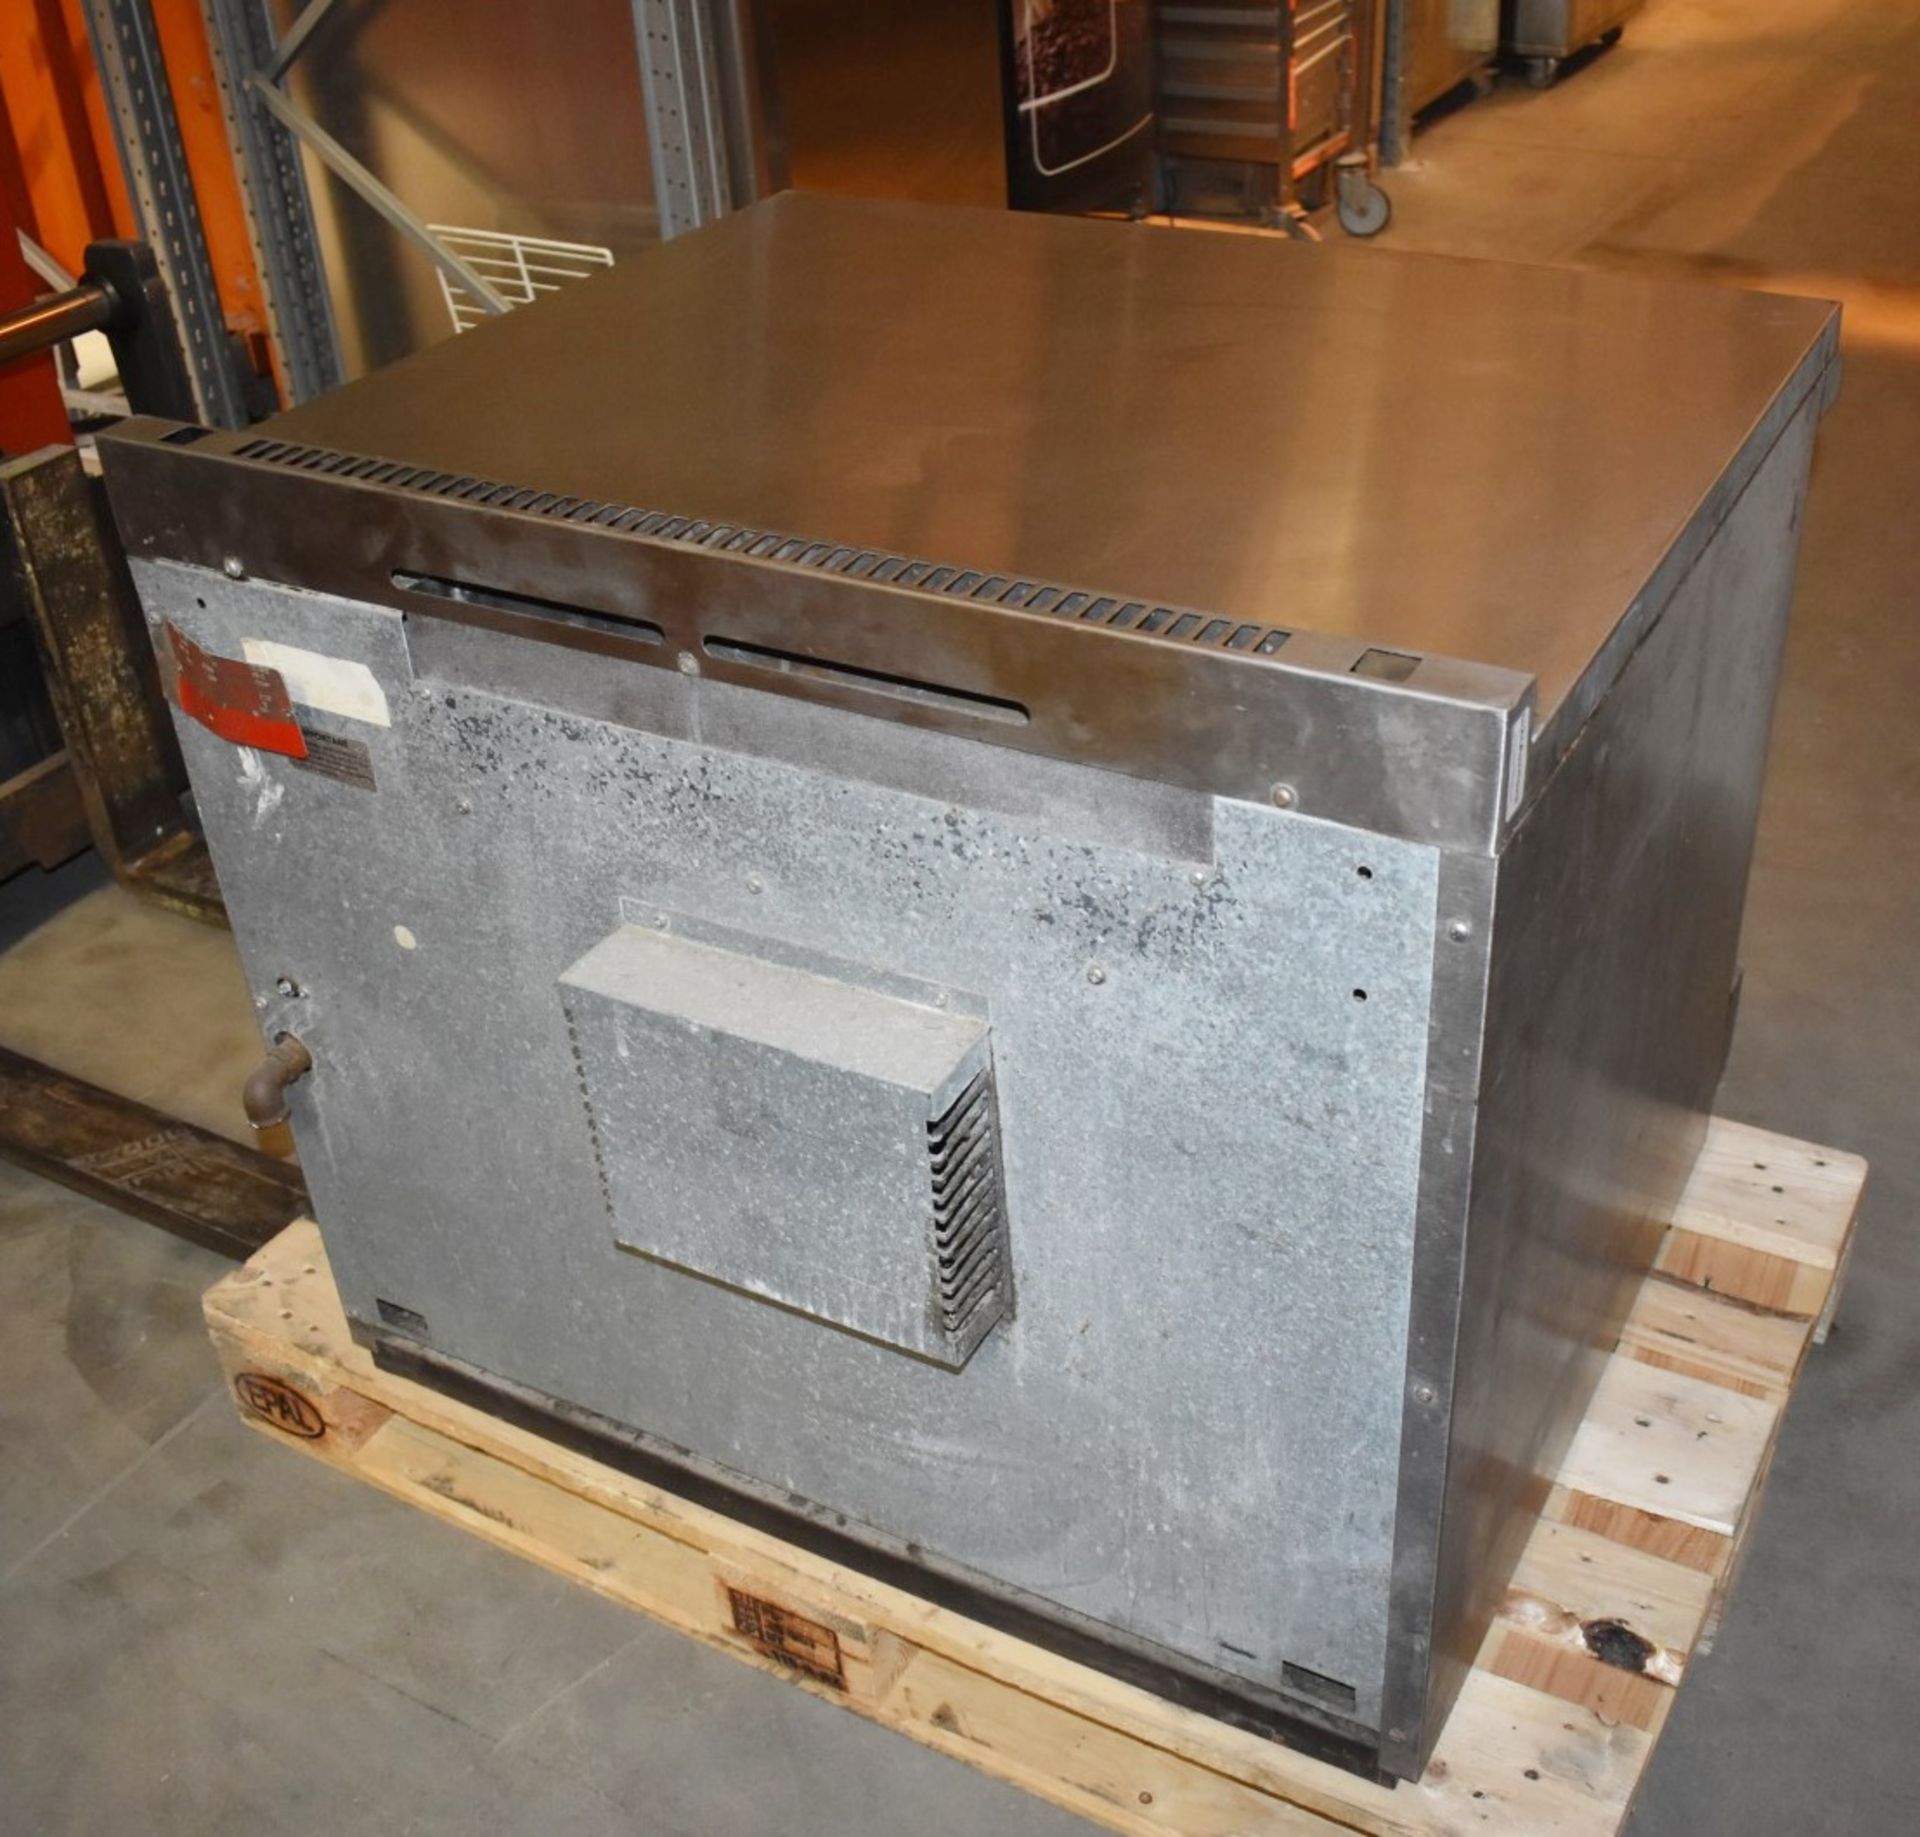 1 x Falcon G1112 Convection Oven - Dimensions: H75 x W90 x D78 cms - 230v / Natural Gas - Image 5 of 10